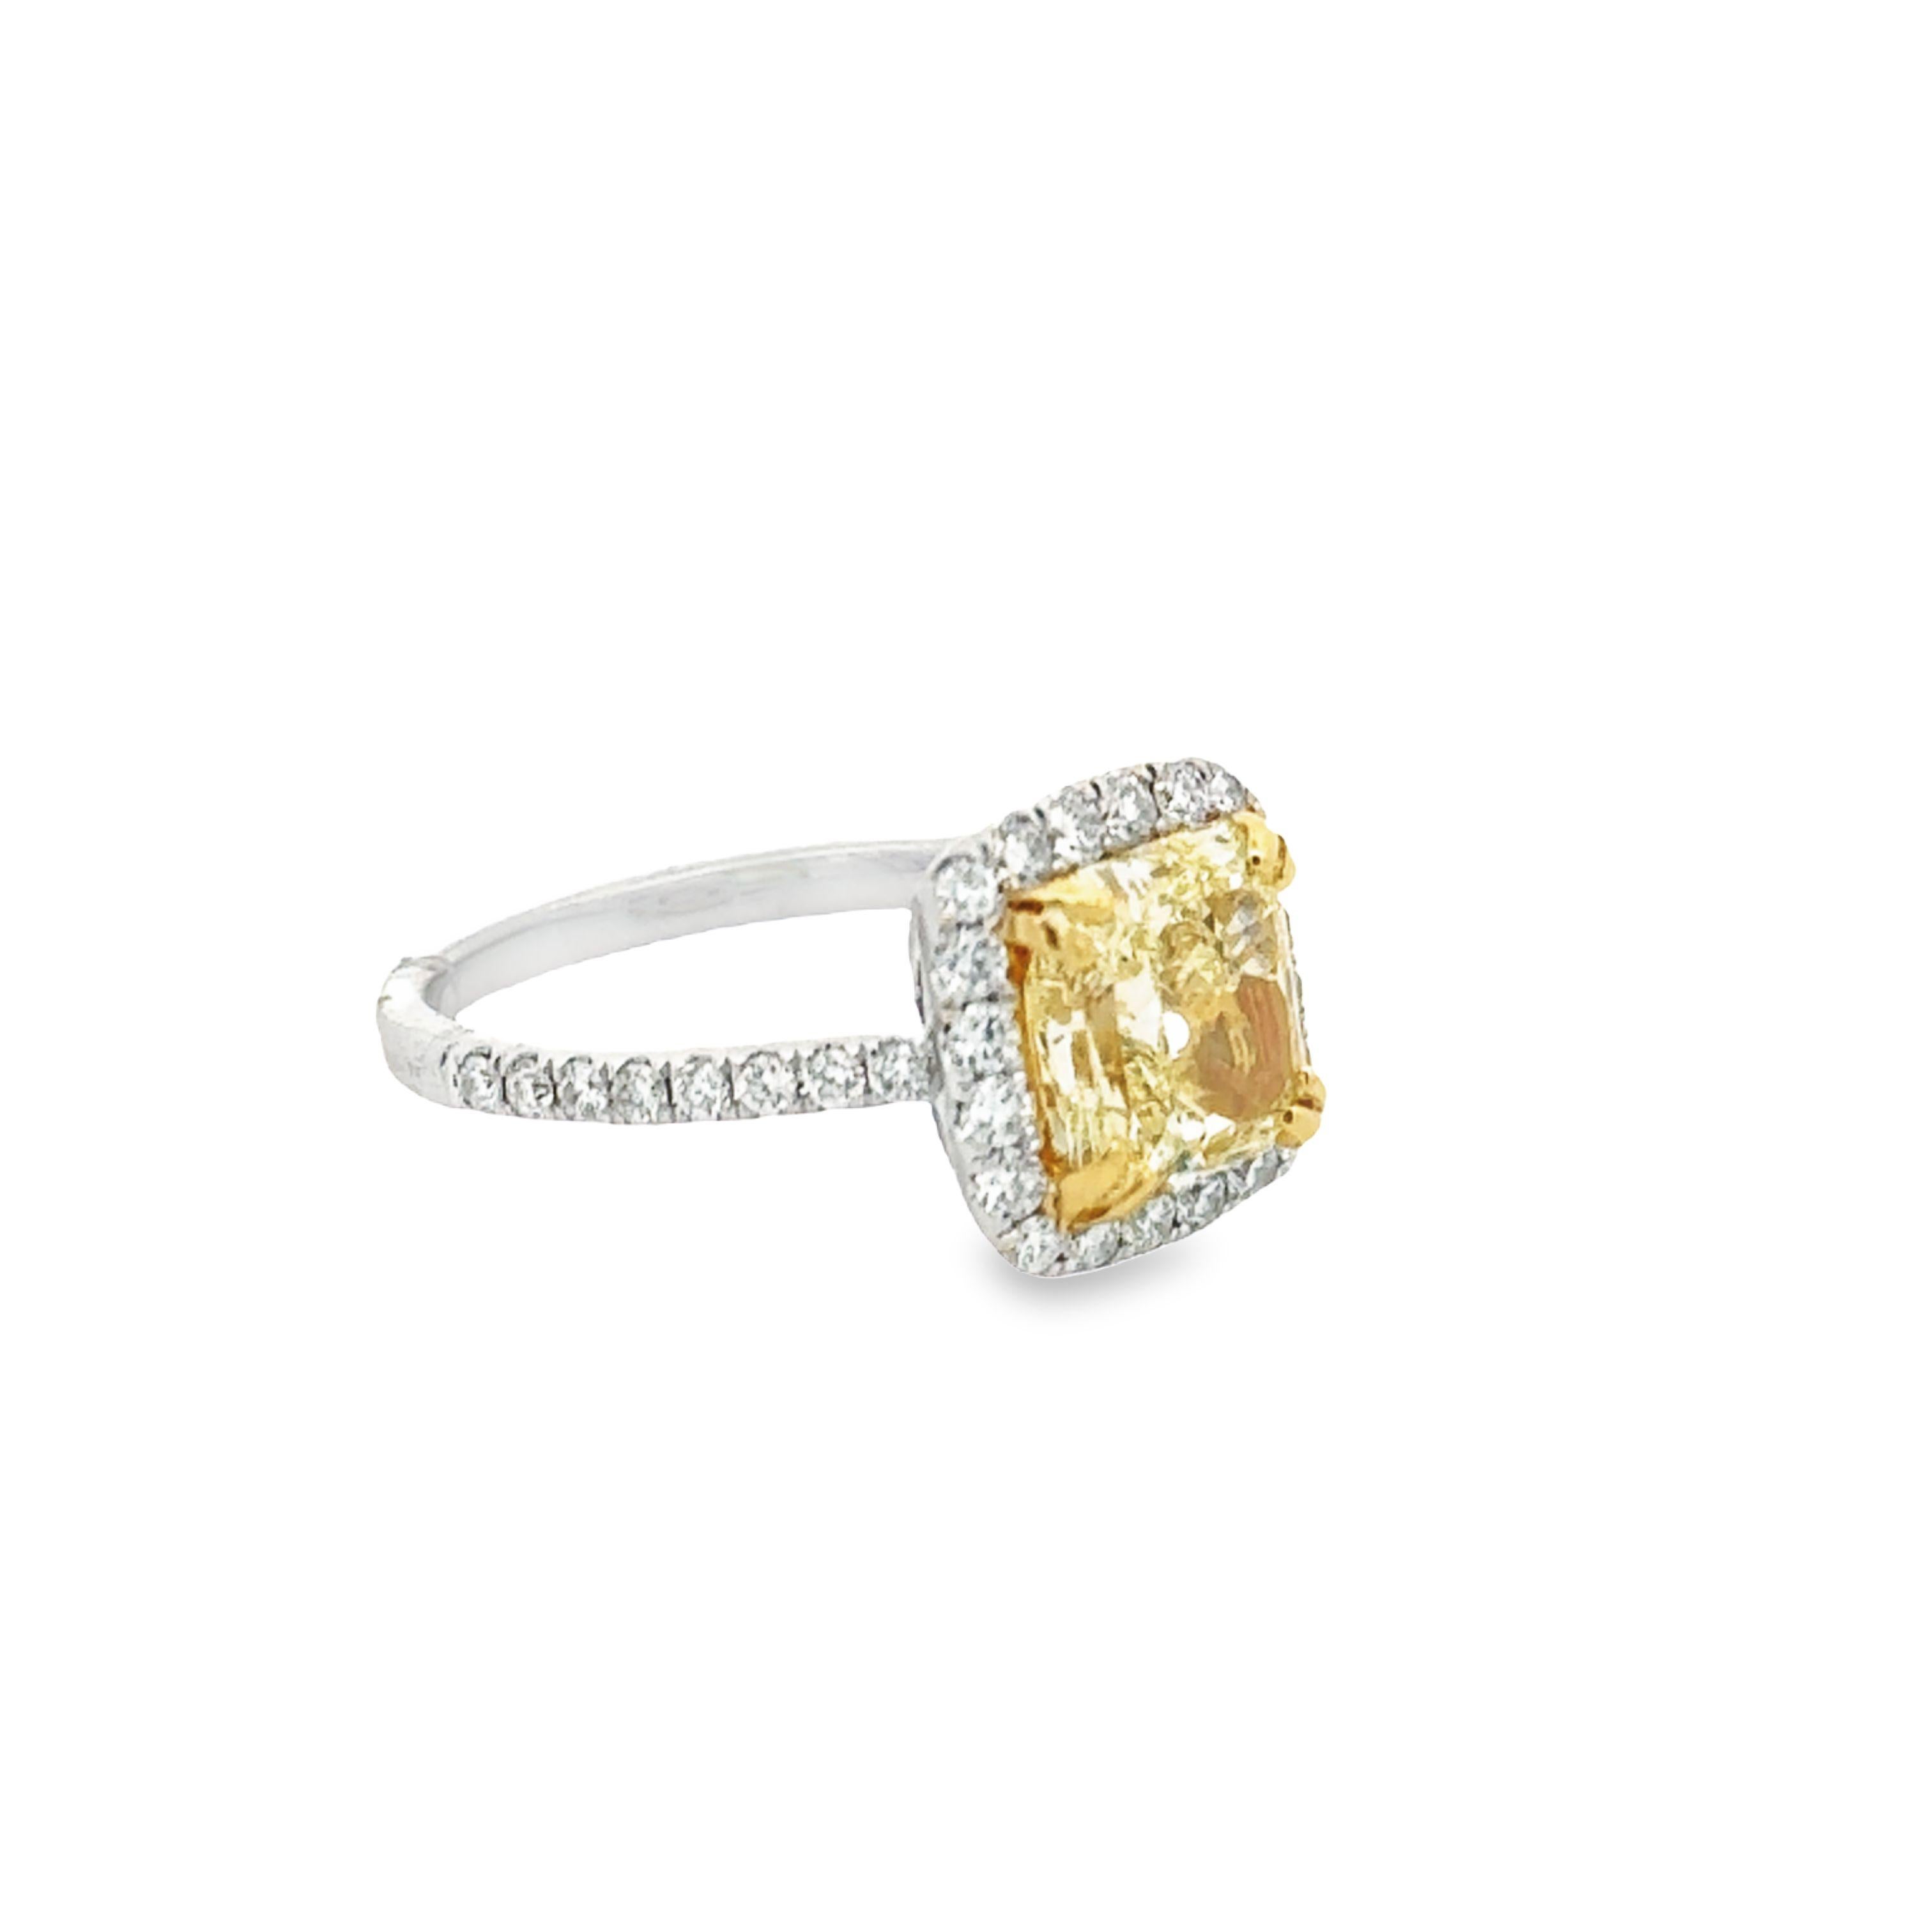 Introducing a radiant marvel that embodies the epitome of luxury and sophistication, behold this extraordinary 2.55-carat Fancy Light Yellow, VS1 Clarity, Radiant Cut Diamond Ring. Certified by GIA, this exceptional gem is exquisitely set into an